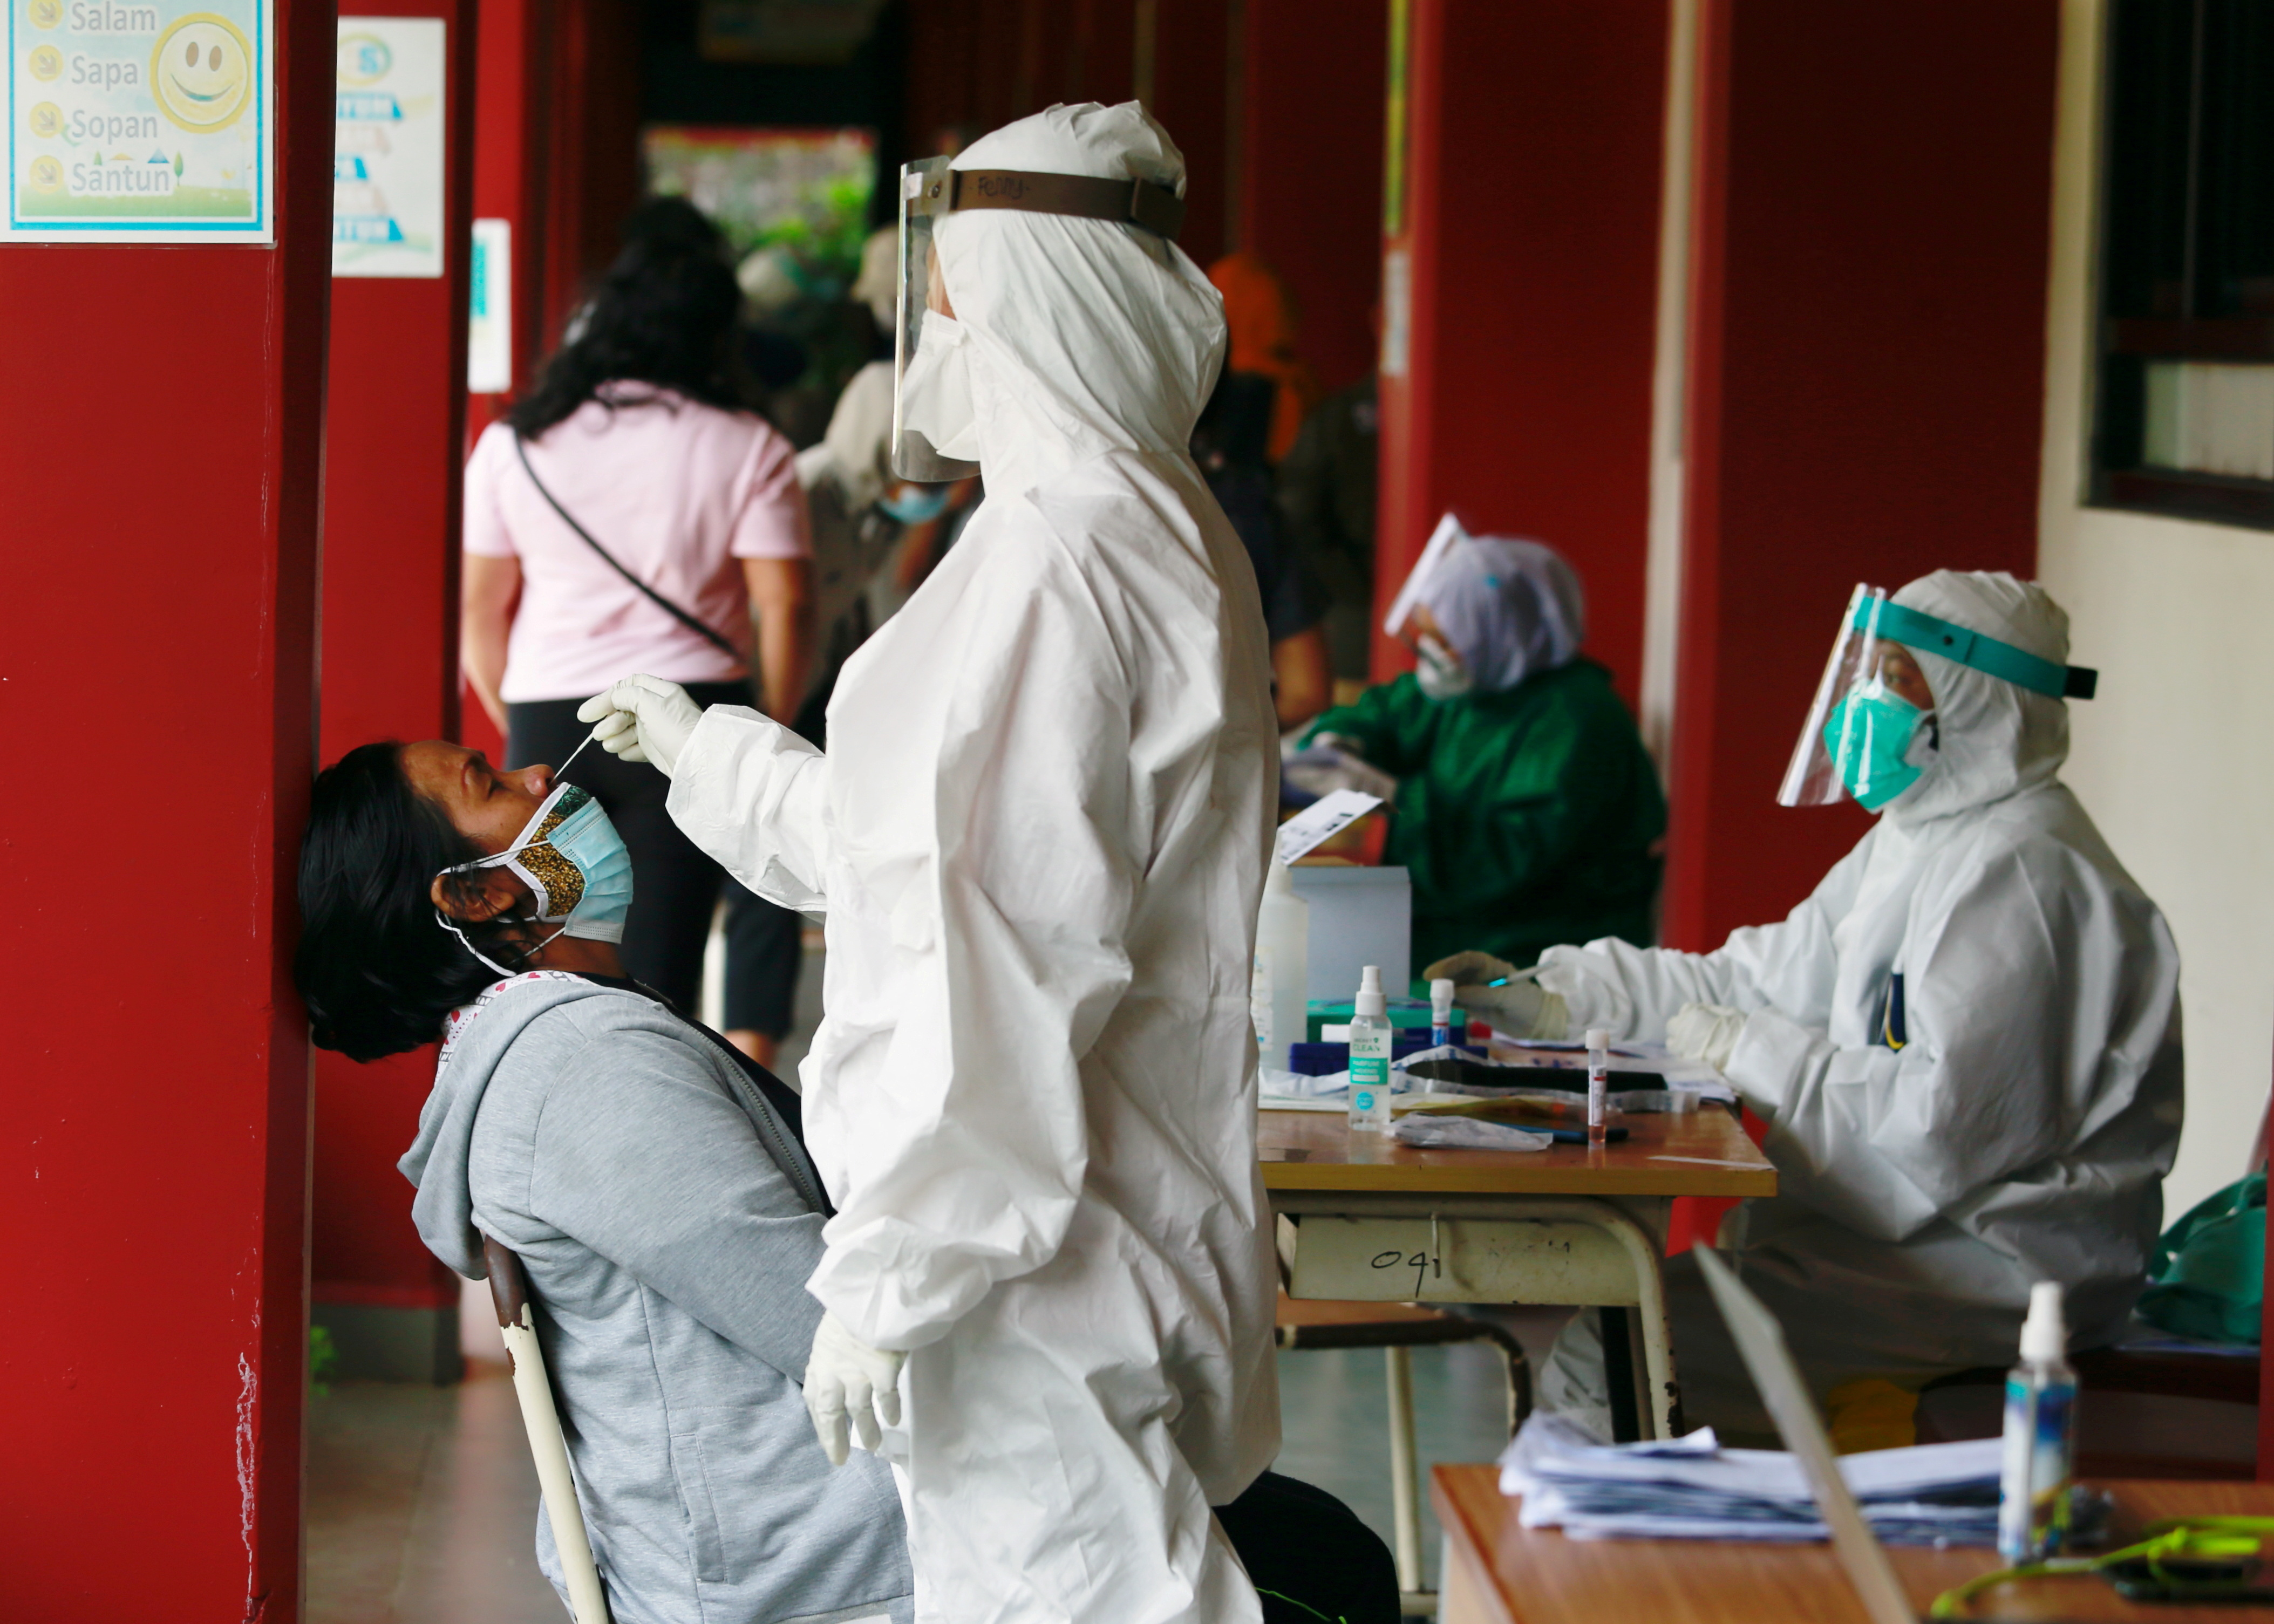 A healthcare worker in personal protective equipment takes a swab sample from a person to test for the coronavirus disease (COVID-19) during mass testing at a school in Jakarta